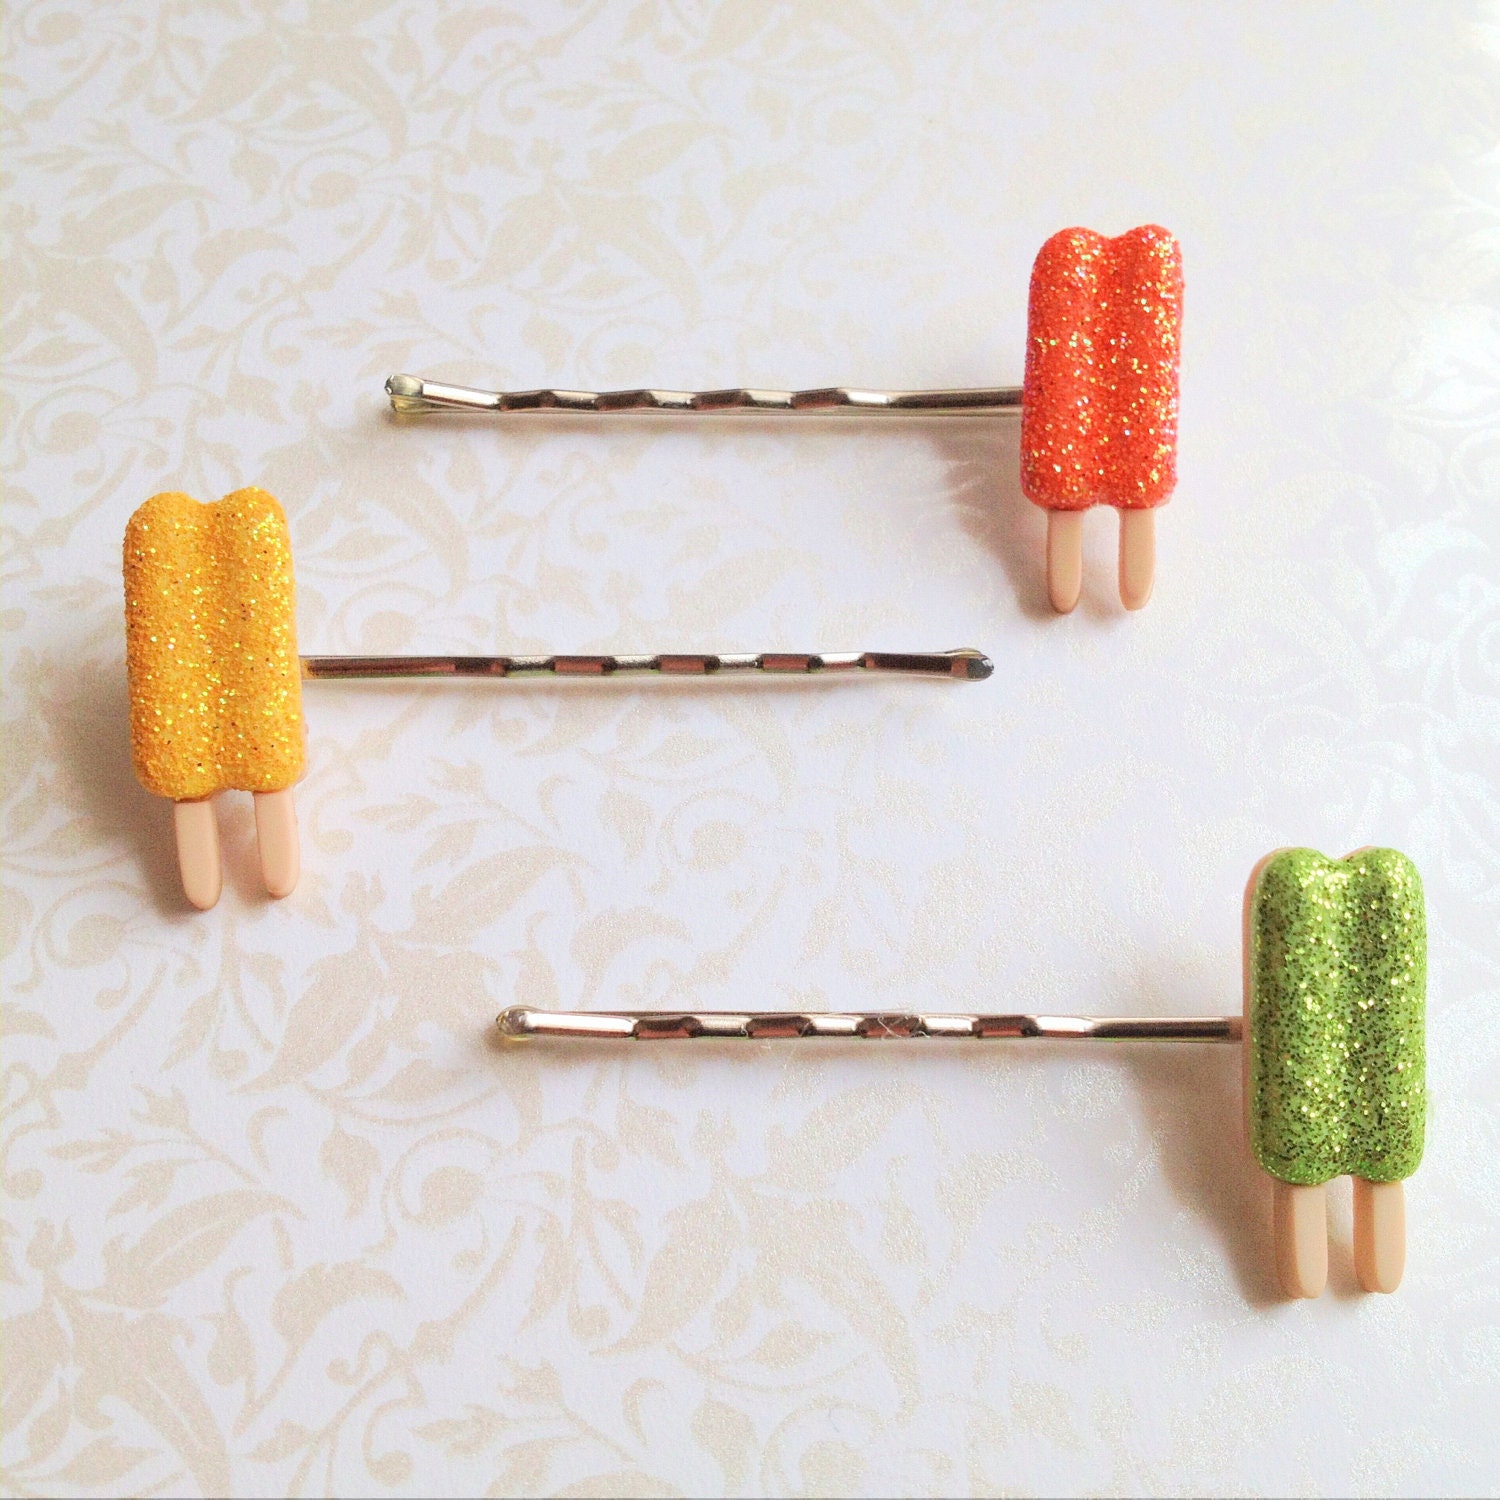 Glitter Popsicle Bobby Pins Set of Three- citrus colors, orange, green, yellow, silver tone bobbies, spring, summer, hair accessory, fun